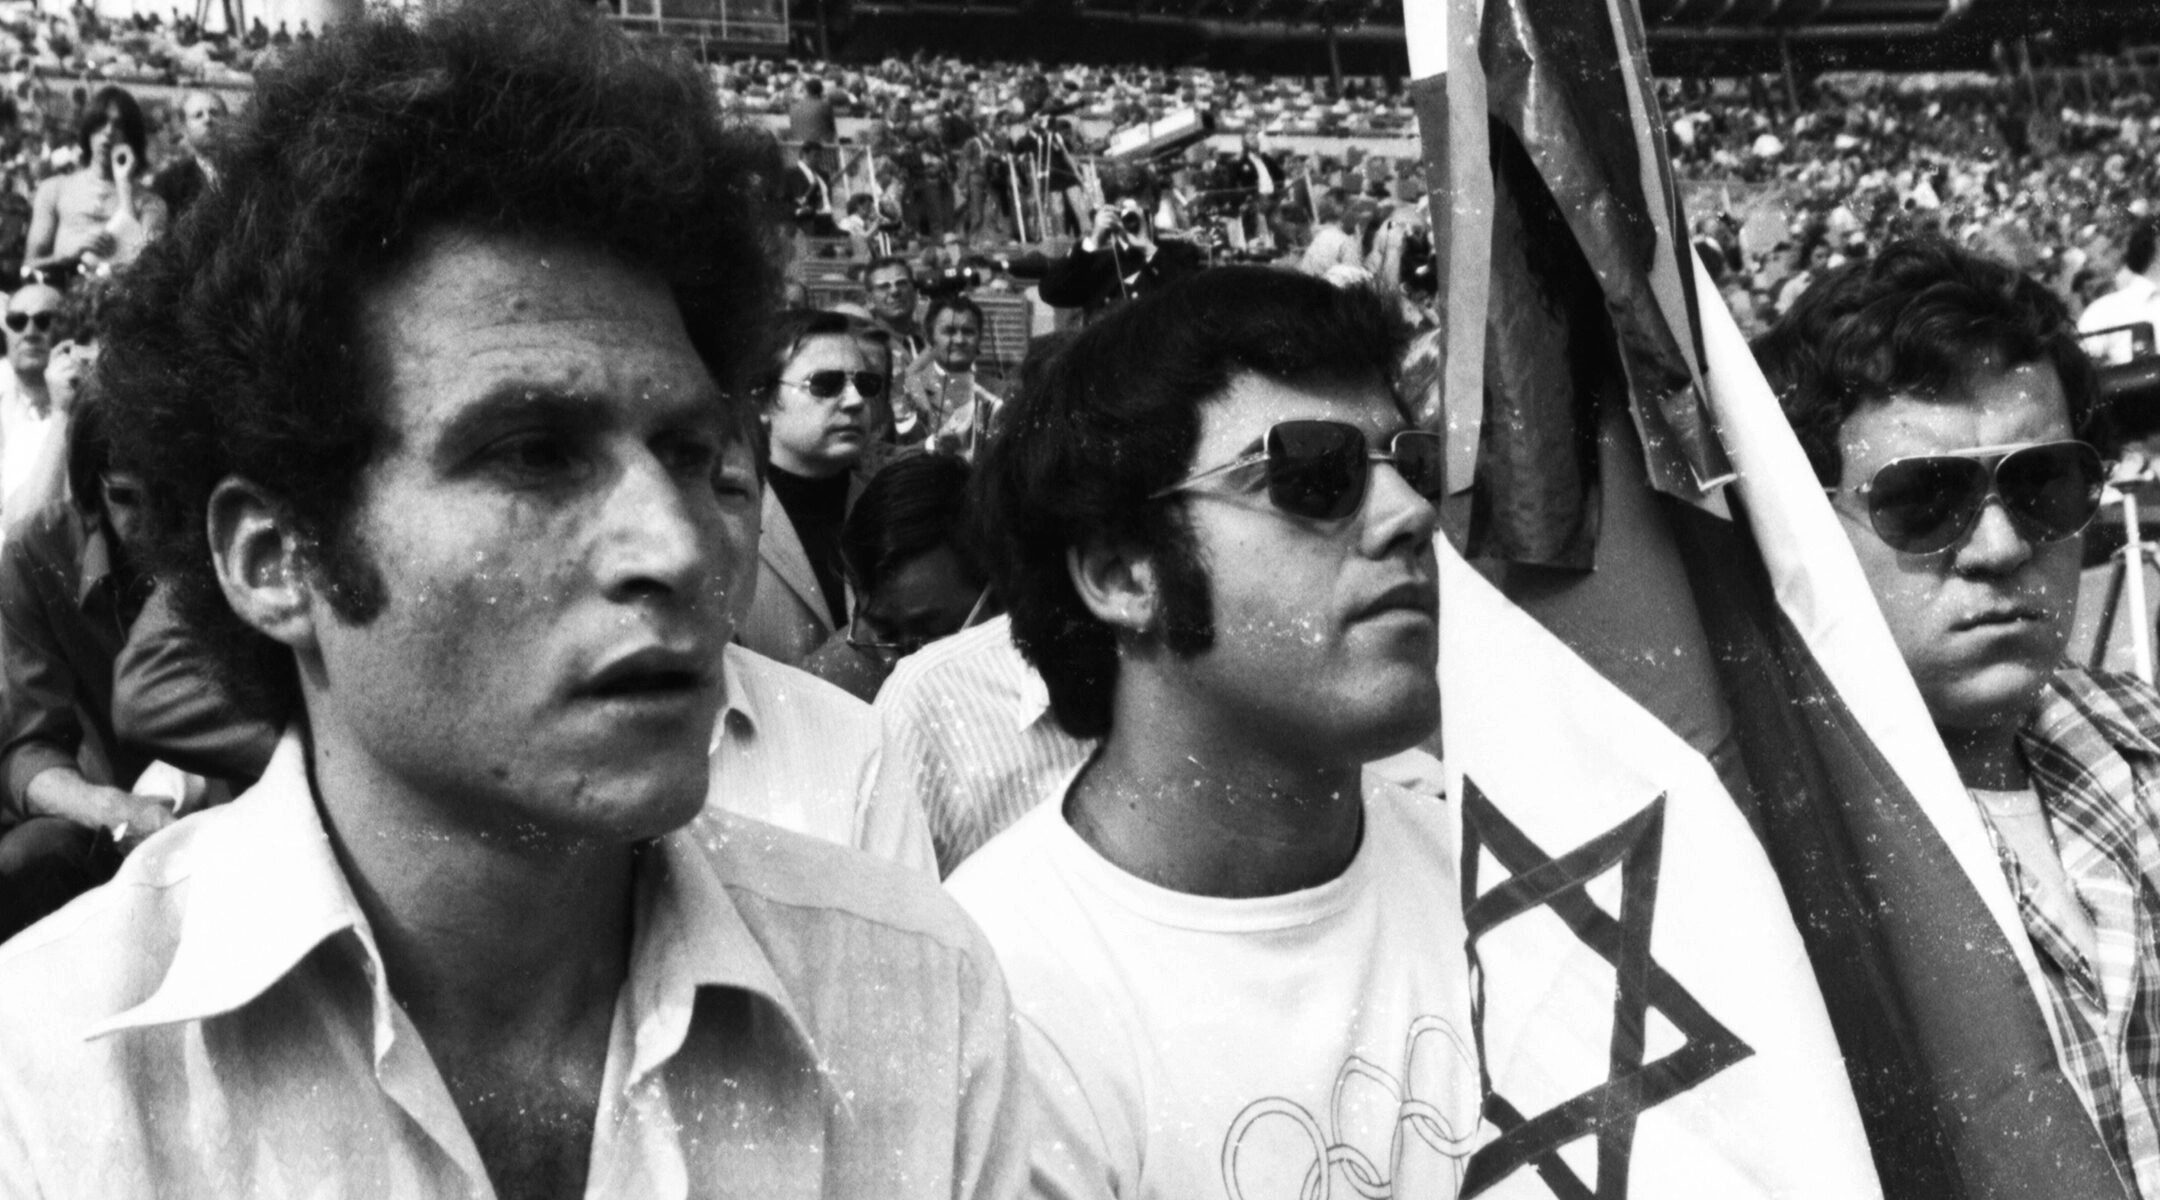 Israeli fans at the 1972 Olympics in Munich, Sept. 5, 1972. (Photo/JTA-Klaus Rose-picture alliance via Getty Images)